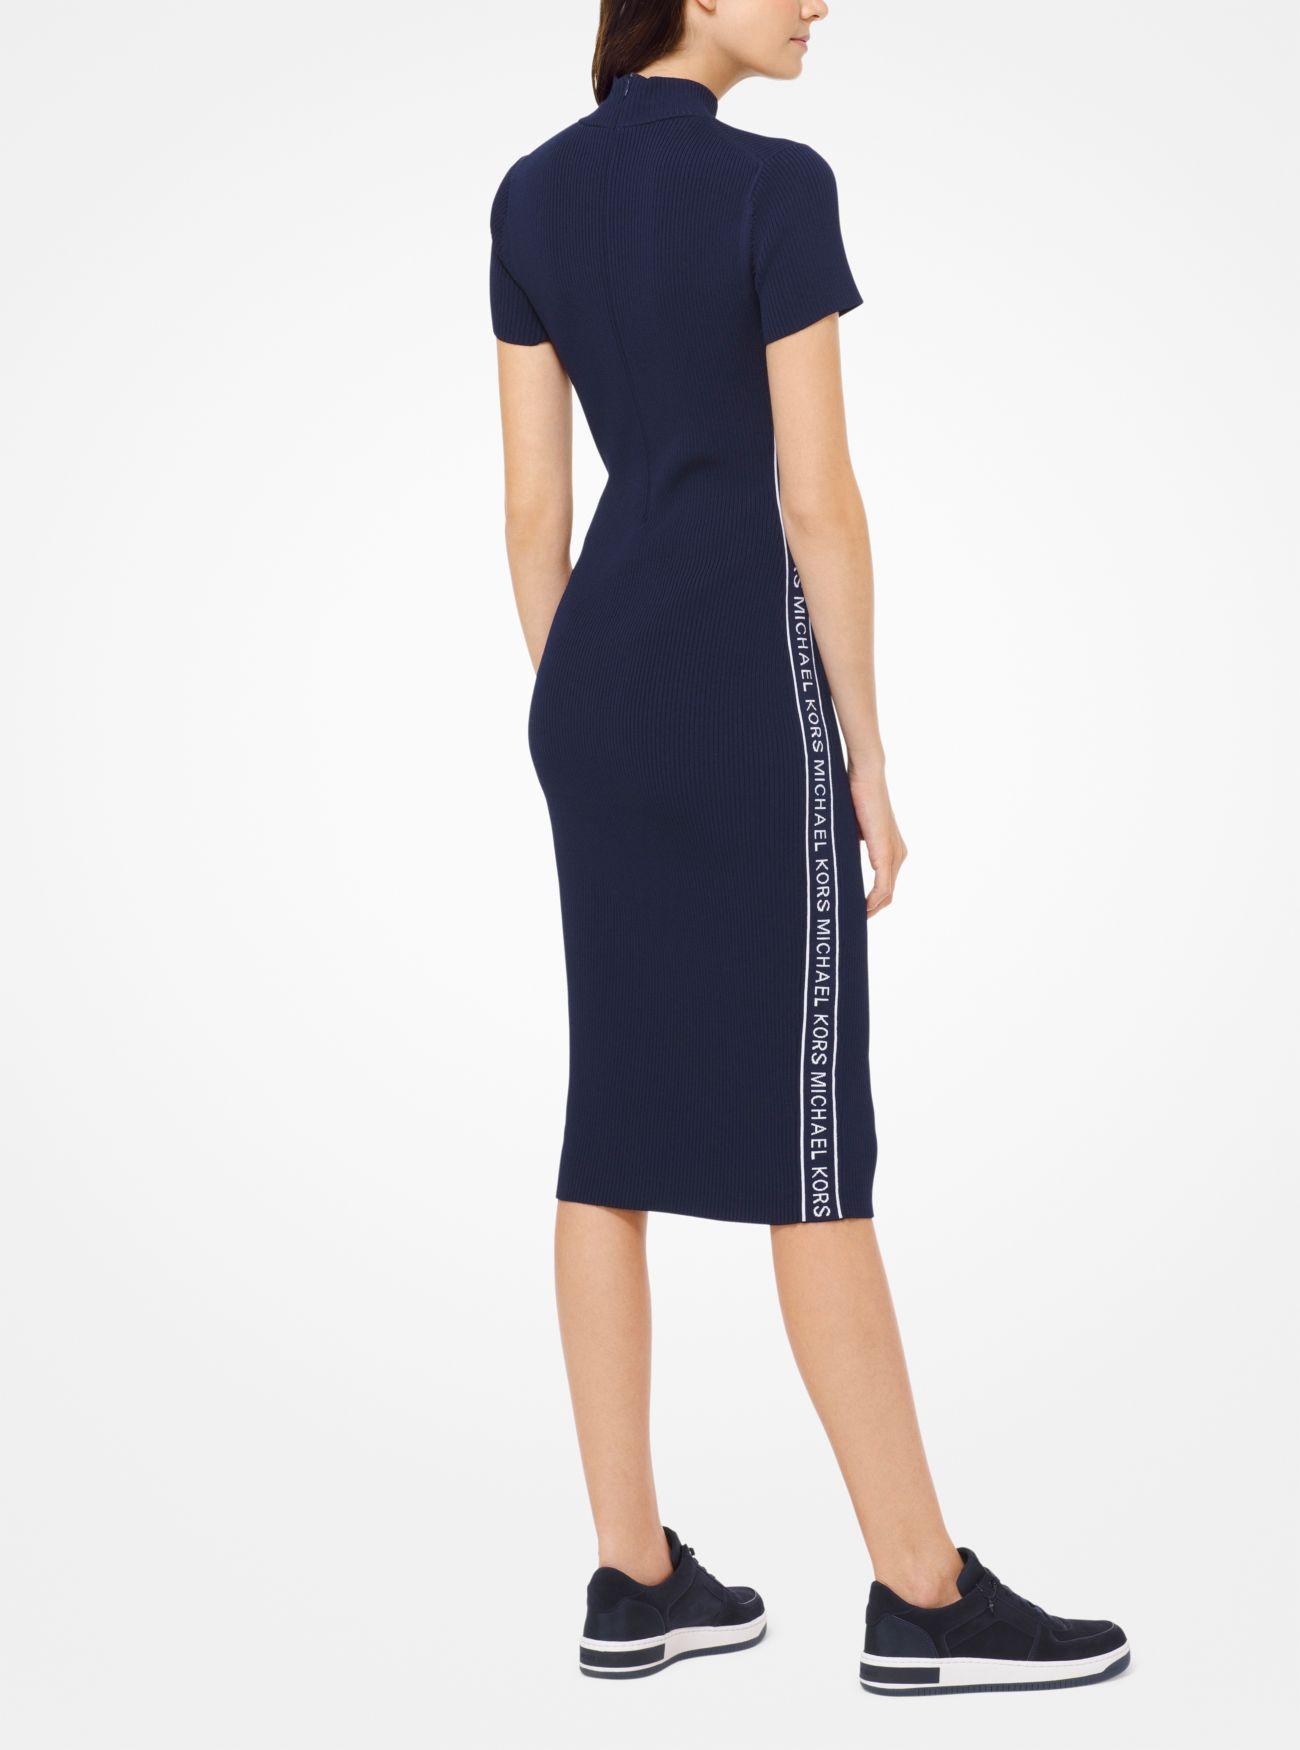 Michael Kors Synthetic Logo Tape Ribbed Knit Dress in Blue - Lyst